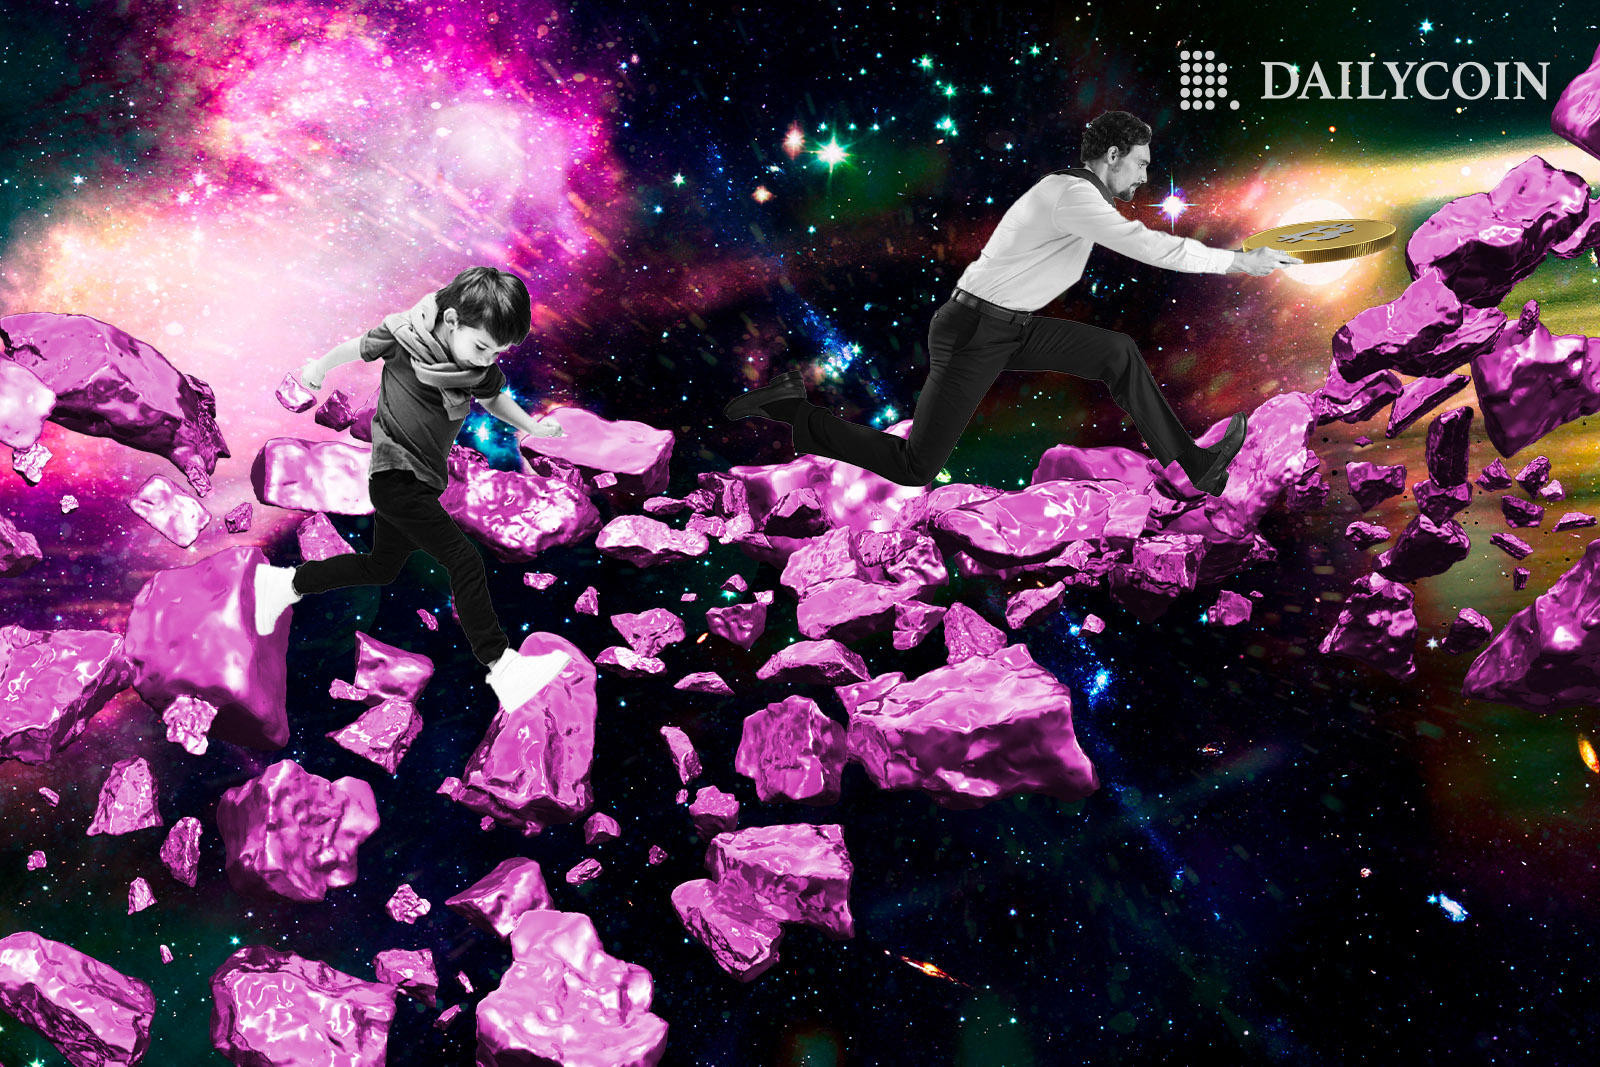 A man holding a bitcoin coin runs on a crumbling pink commit through space. A child runs to keep up behind him